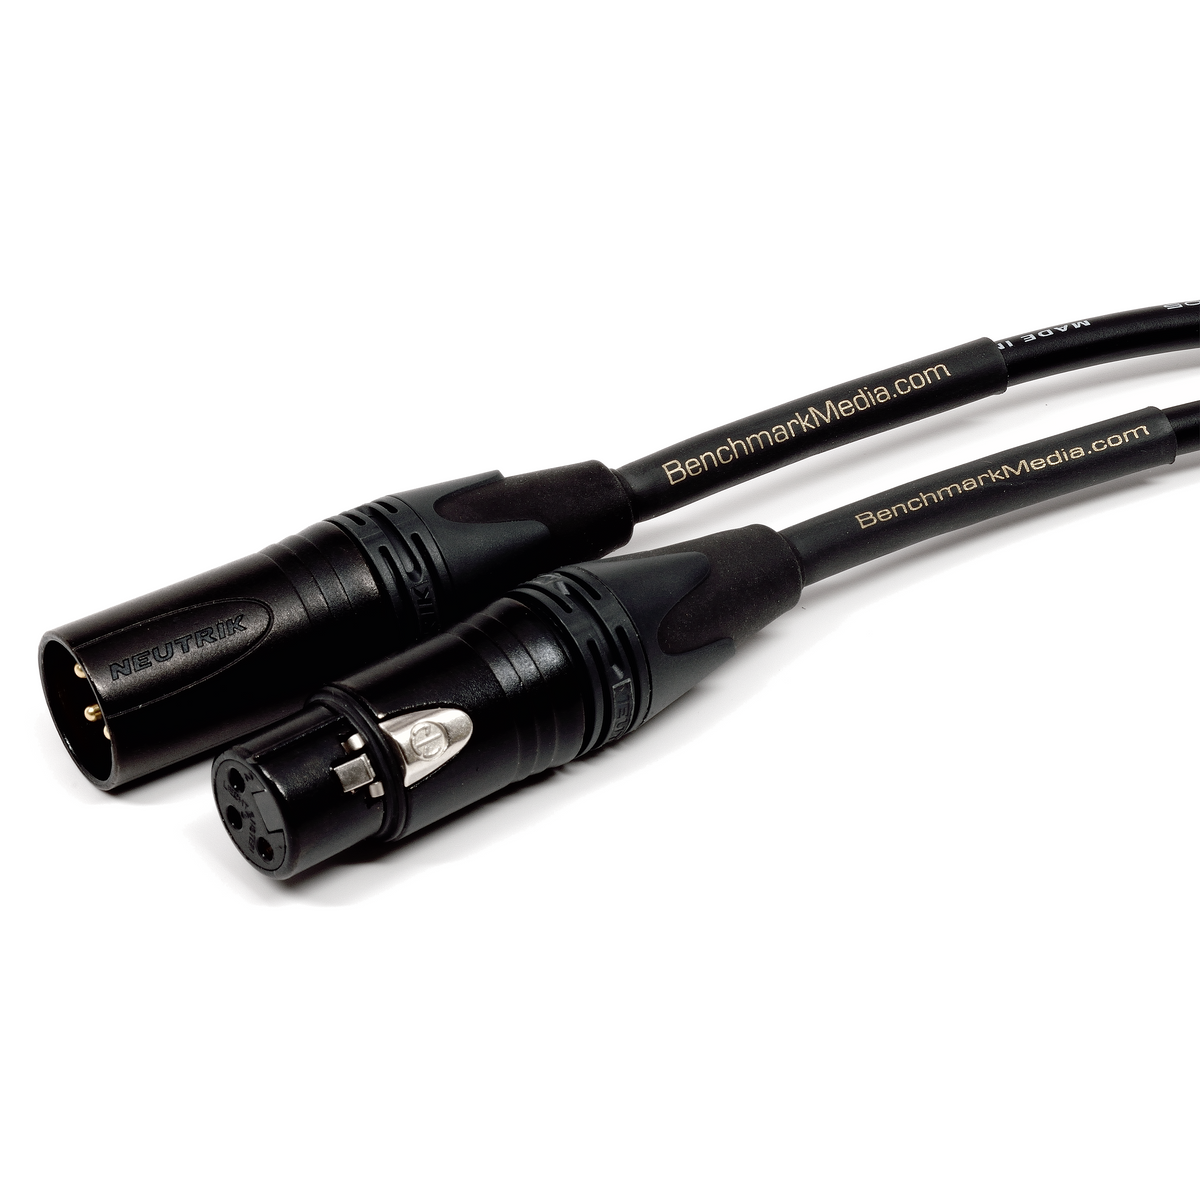 Cable Subwoofer Monolith Digital RCA a RCA 2 mts